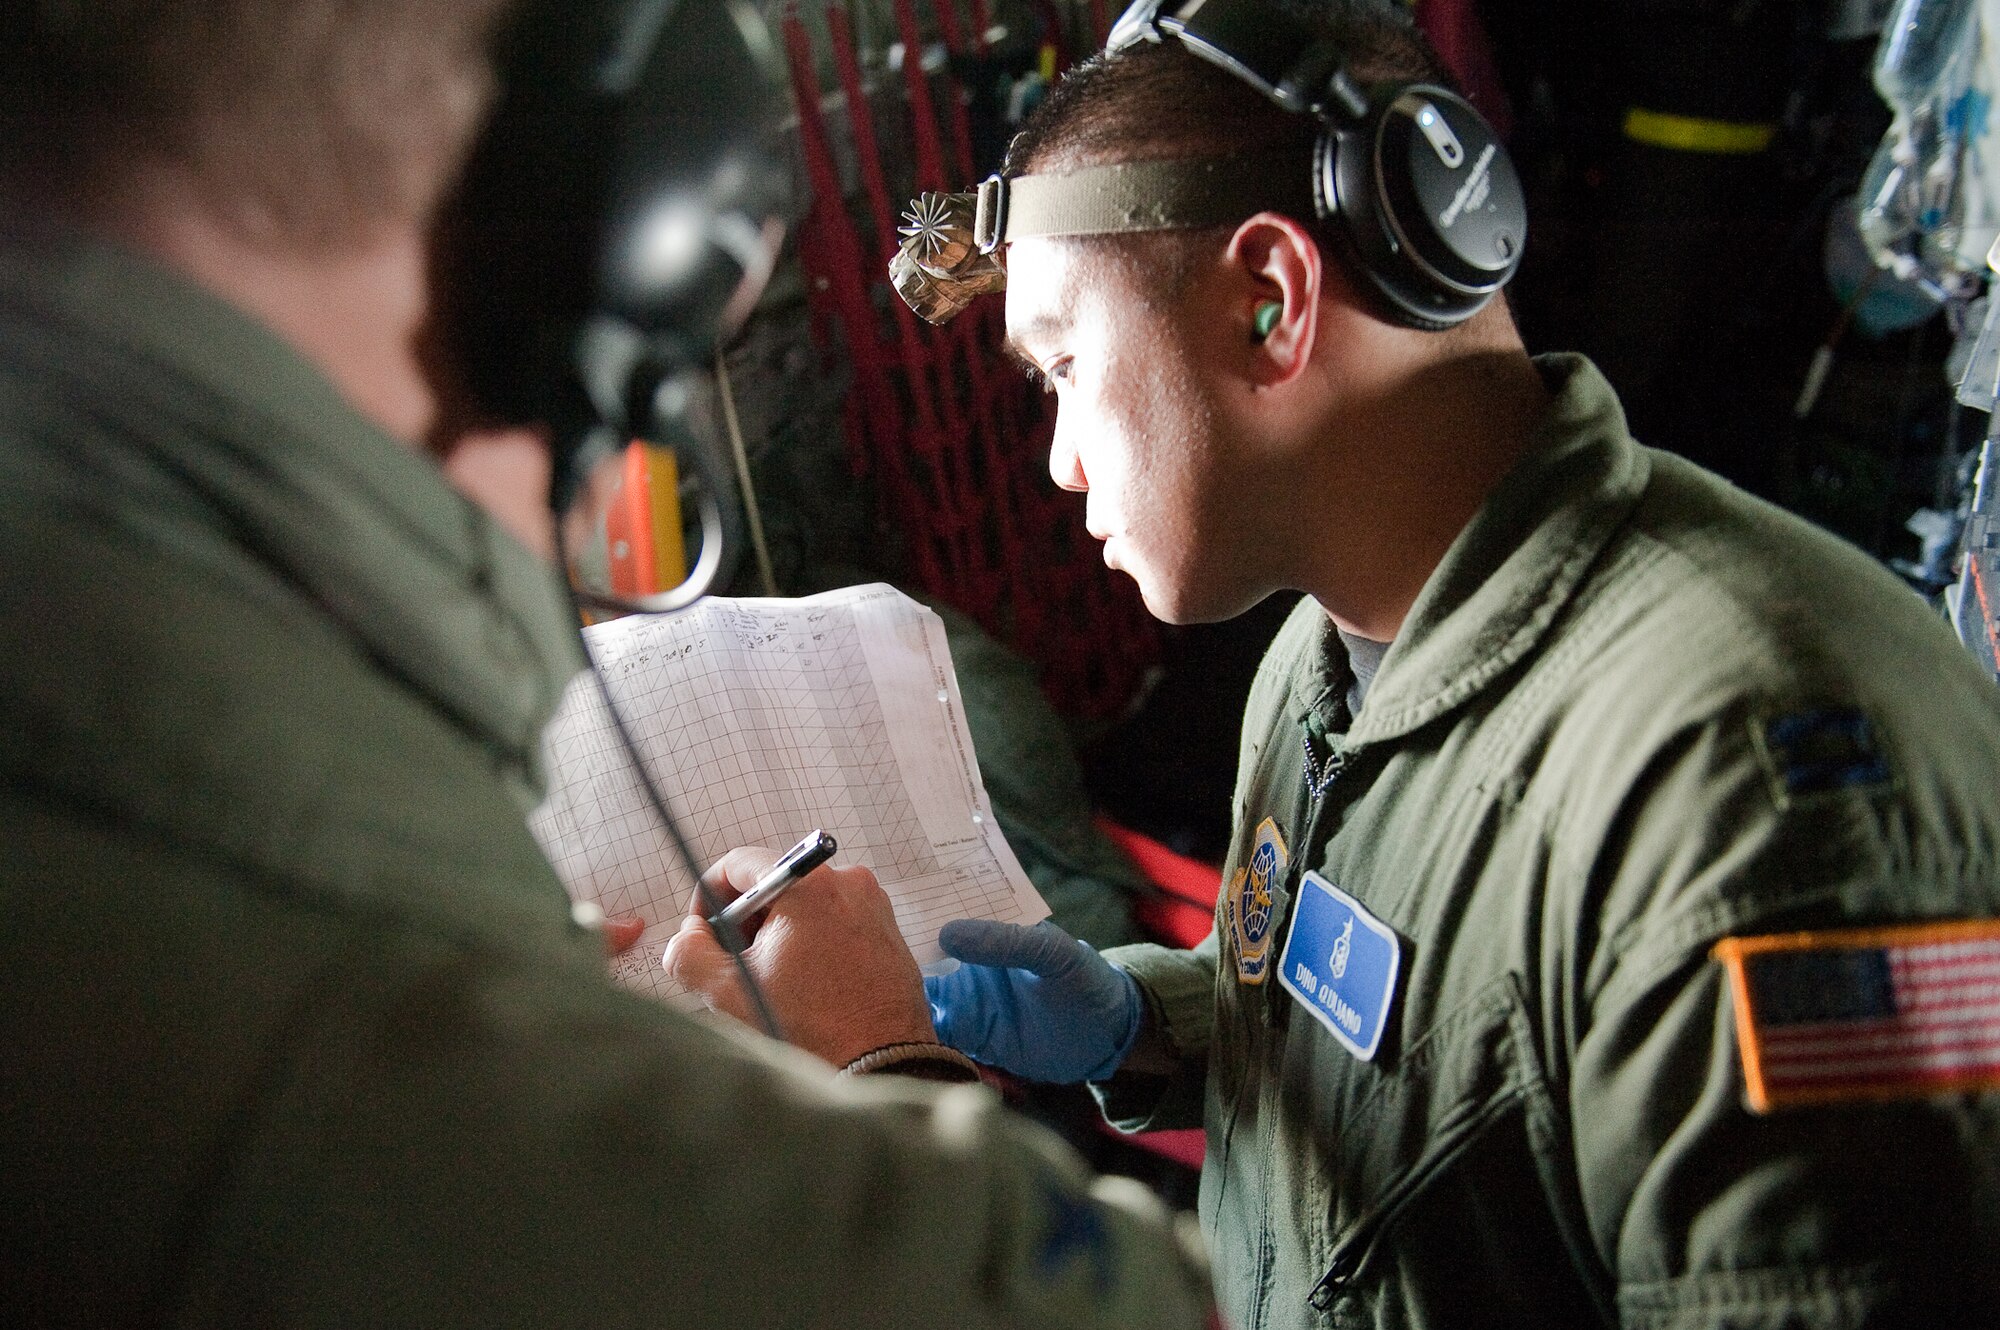 CINCINNATI, OHIO -- Col. Todd Carter (left), an Air Force medical instructor, helps Capt. Dino Quijano annotate patient records during an aeromedical training exercise over the skies of southern Ohio on Feb. 11, 2010. Captain Quijano, a nurse from the 60th Inpatient Squadron at Travis Air Force Base, Calif., was participating in a two-week Critical Care Air Transport Team course designed to provide medical personnel with total immersion in the care of severely injured patients. Ground training and simulated-flight training are conducted at the University of Cincinnati, one of four Air Force Centers for Sustainment of Trauma and Readiness Skills (CSTARS) nationwide, but the final day of instruction is provided while airborne in a Kentucky Air Guard C-130. Kentucky's 165th Airlift Squadron began providing C-130s to use as a CSTARS training platform in 2009. (U.S. Air Force by Maj. Dale Greer)